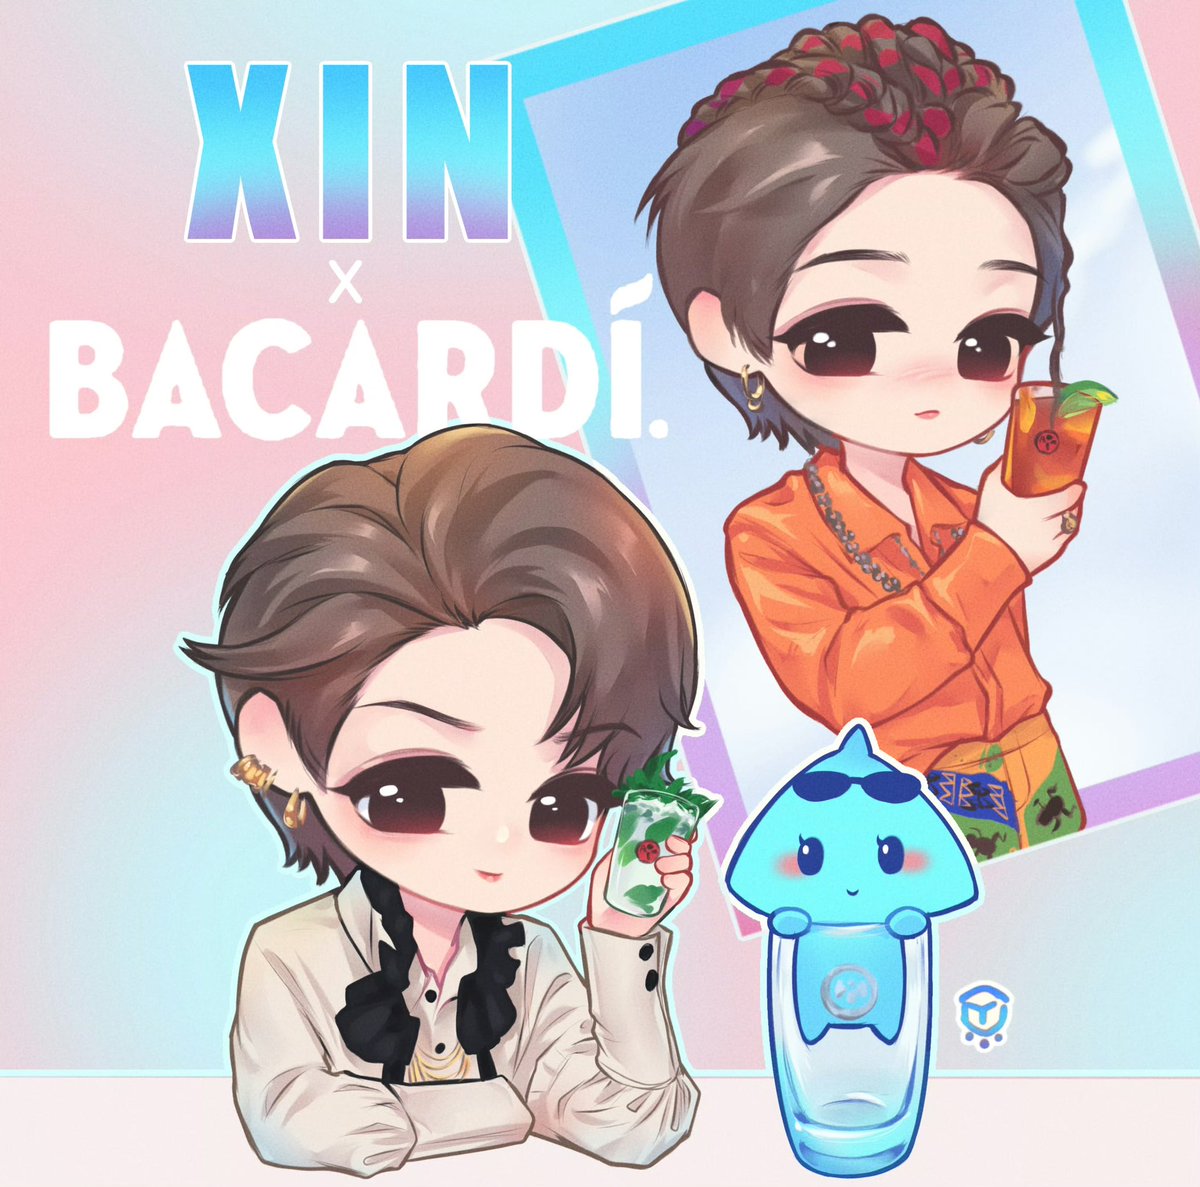 Luv this vibe
Perfectly match🤘

Can’t wait to have a drink 

#XINxBacardi #BACARDI #XINLiu #LiuYuxin